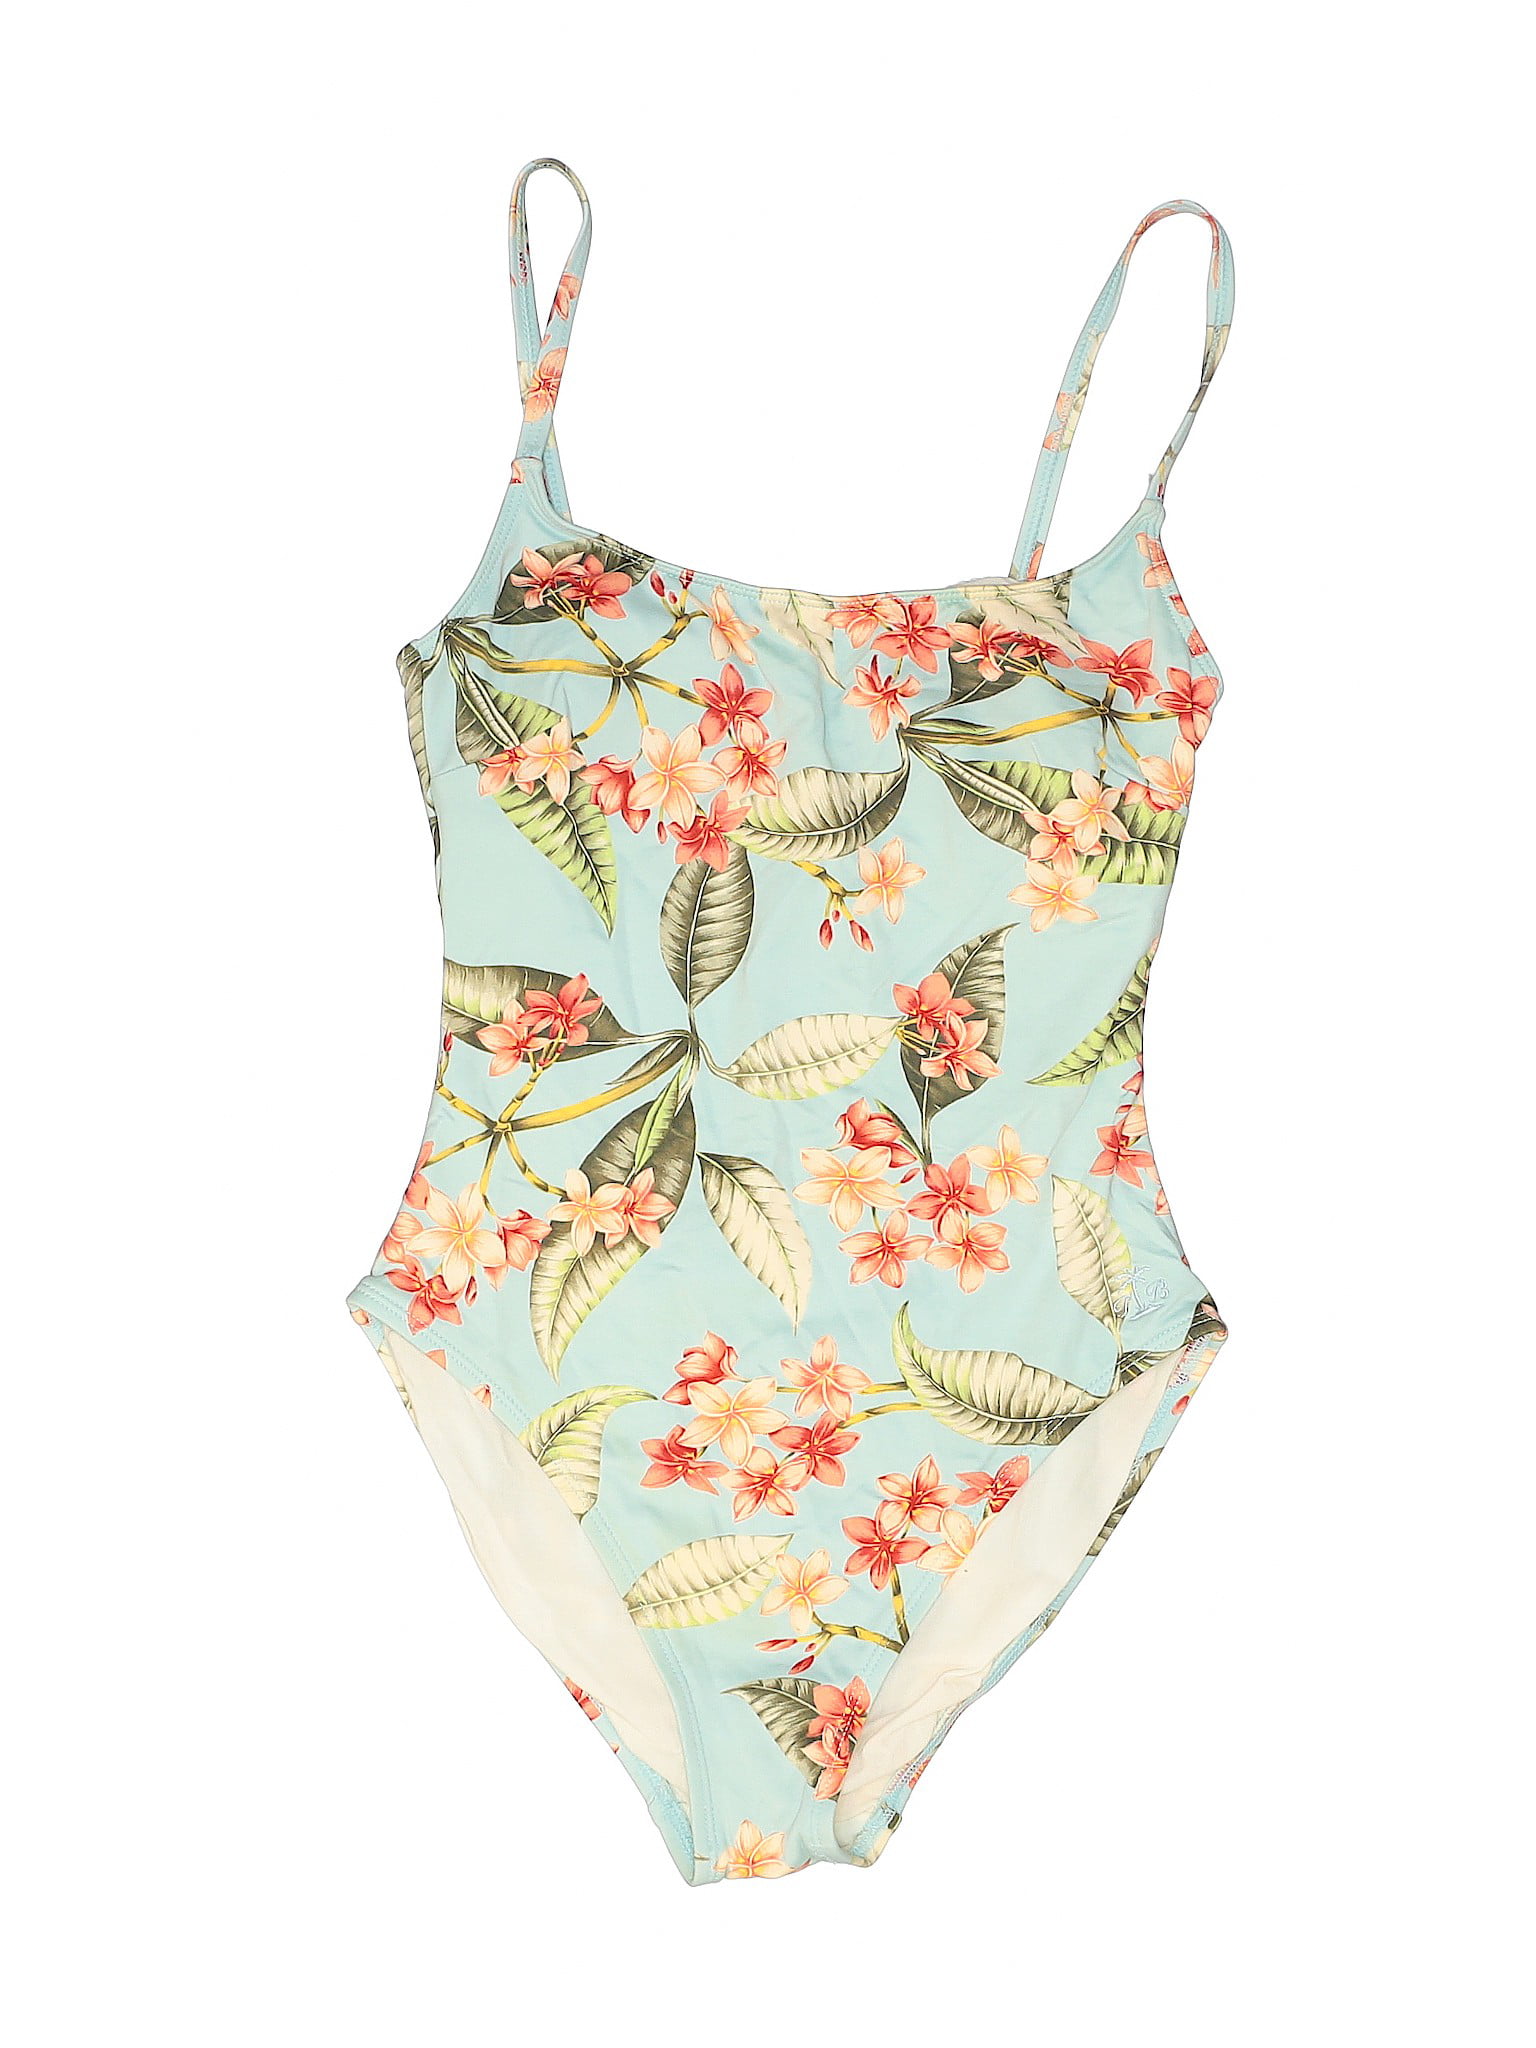 Tommy Bahama - Pre-Owned Tommy Bahama Women's Size 8 One Piece Swimsuit ...